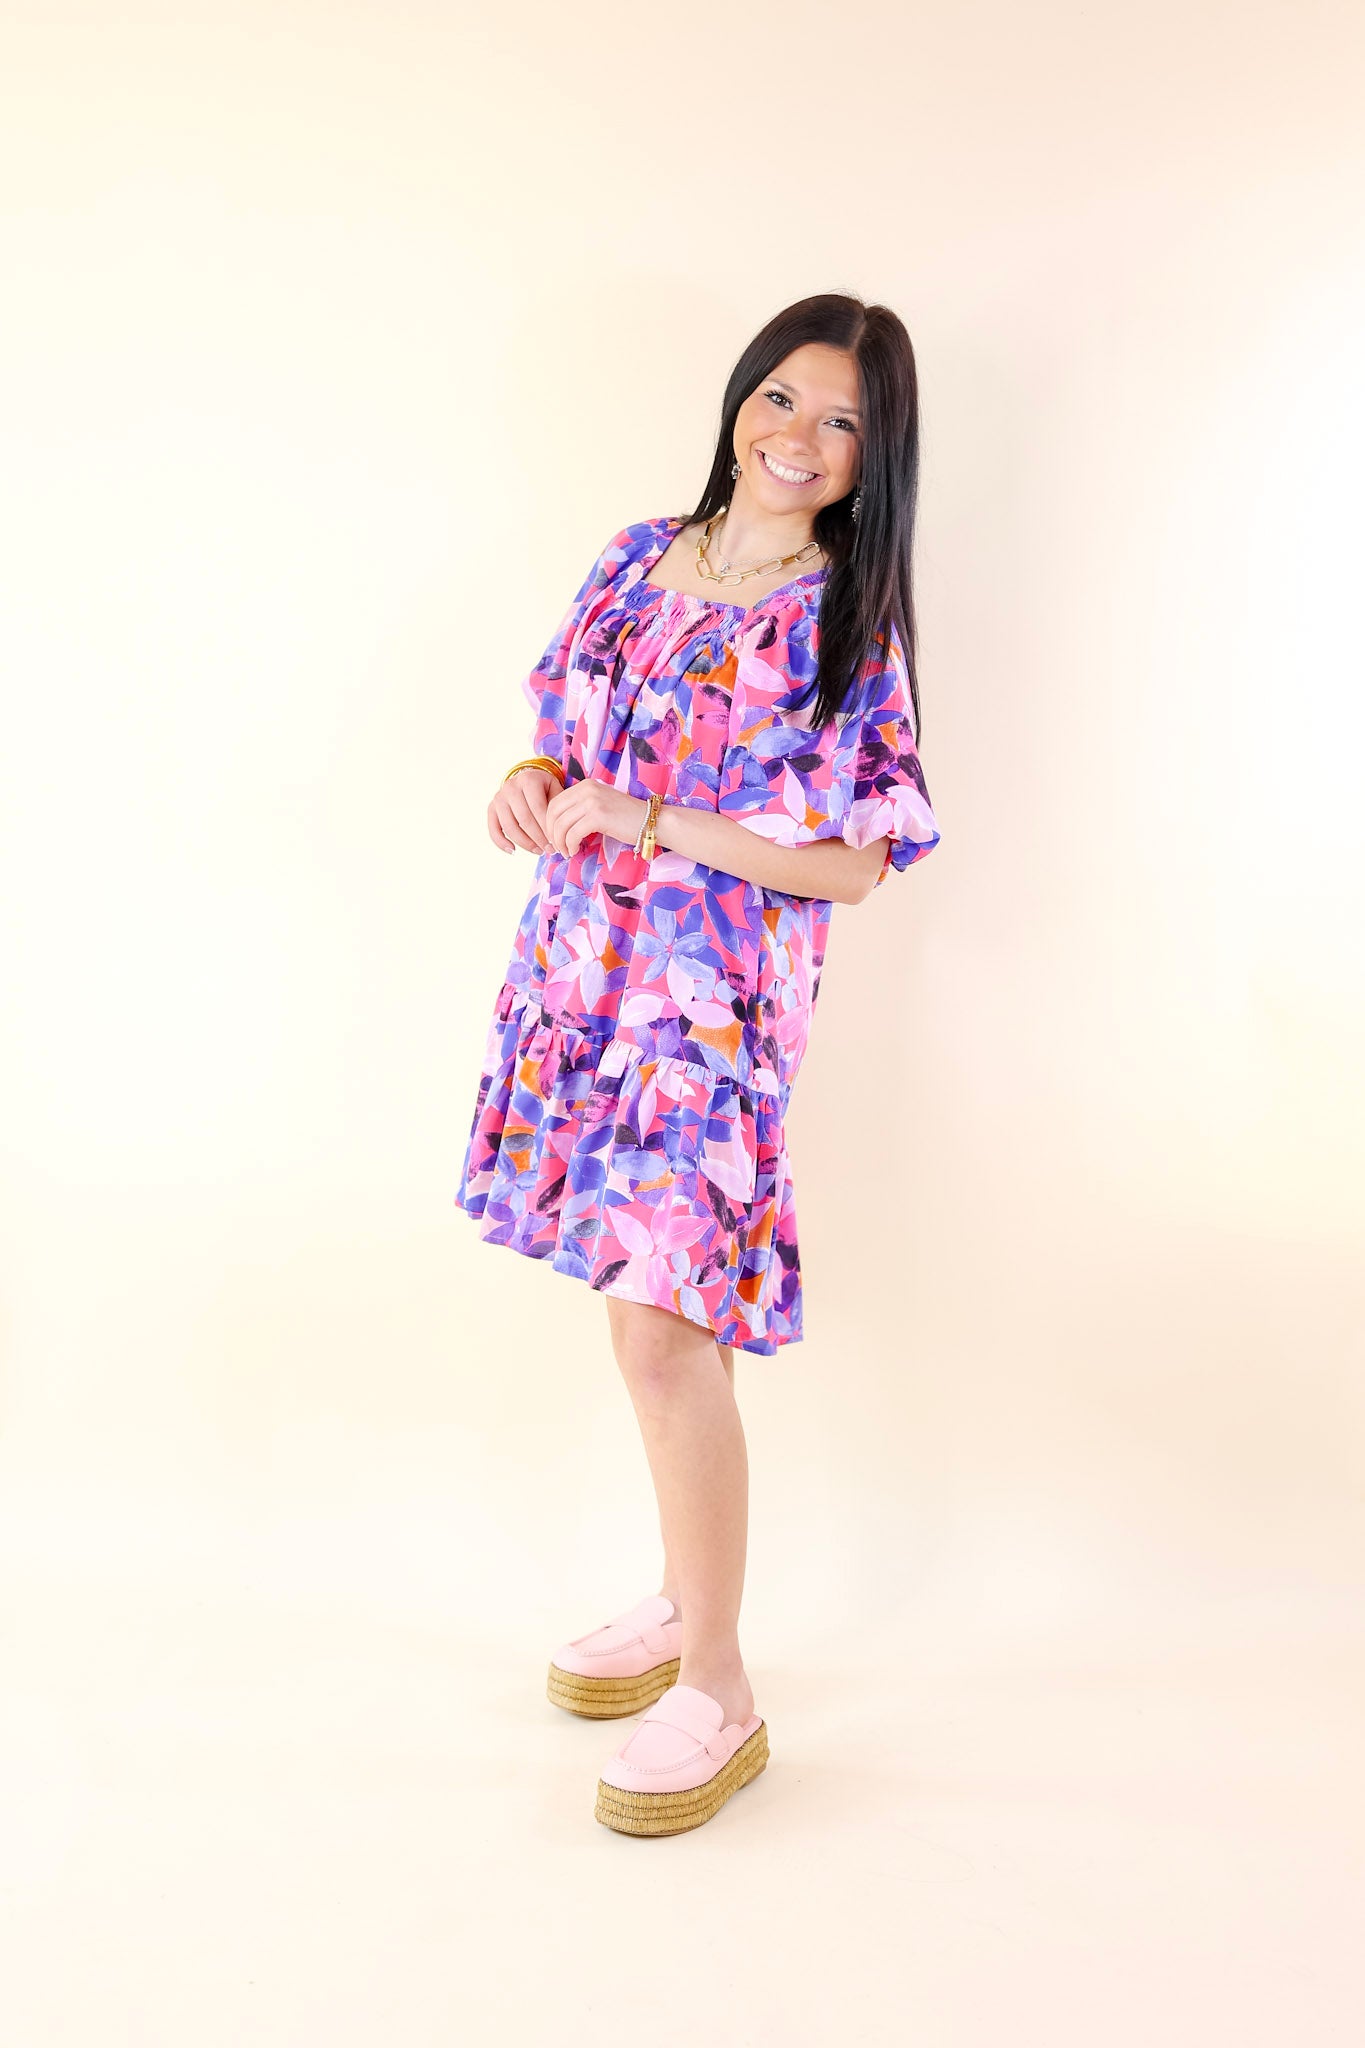 Blossoming Beauty Floral Print Dress in Magenta Pink - Giddy Up Glamour Boutique